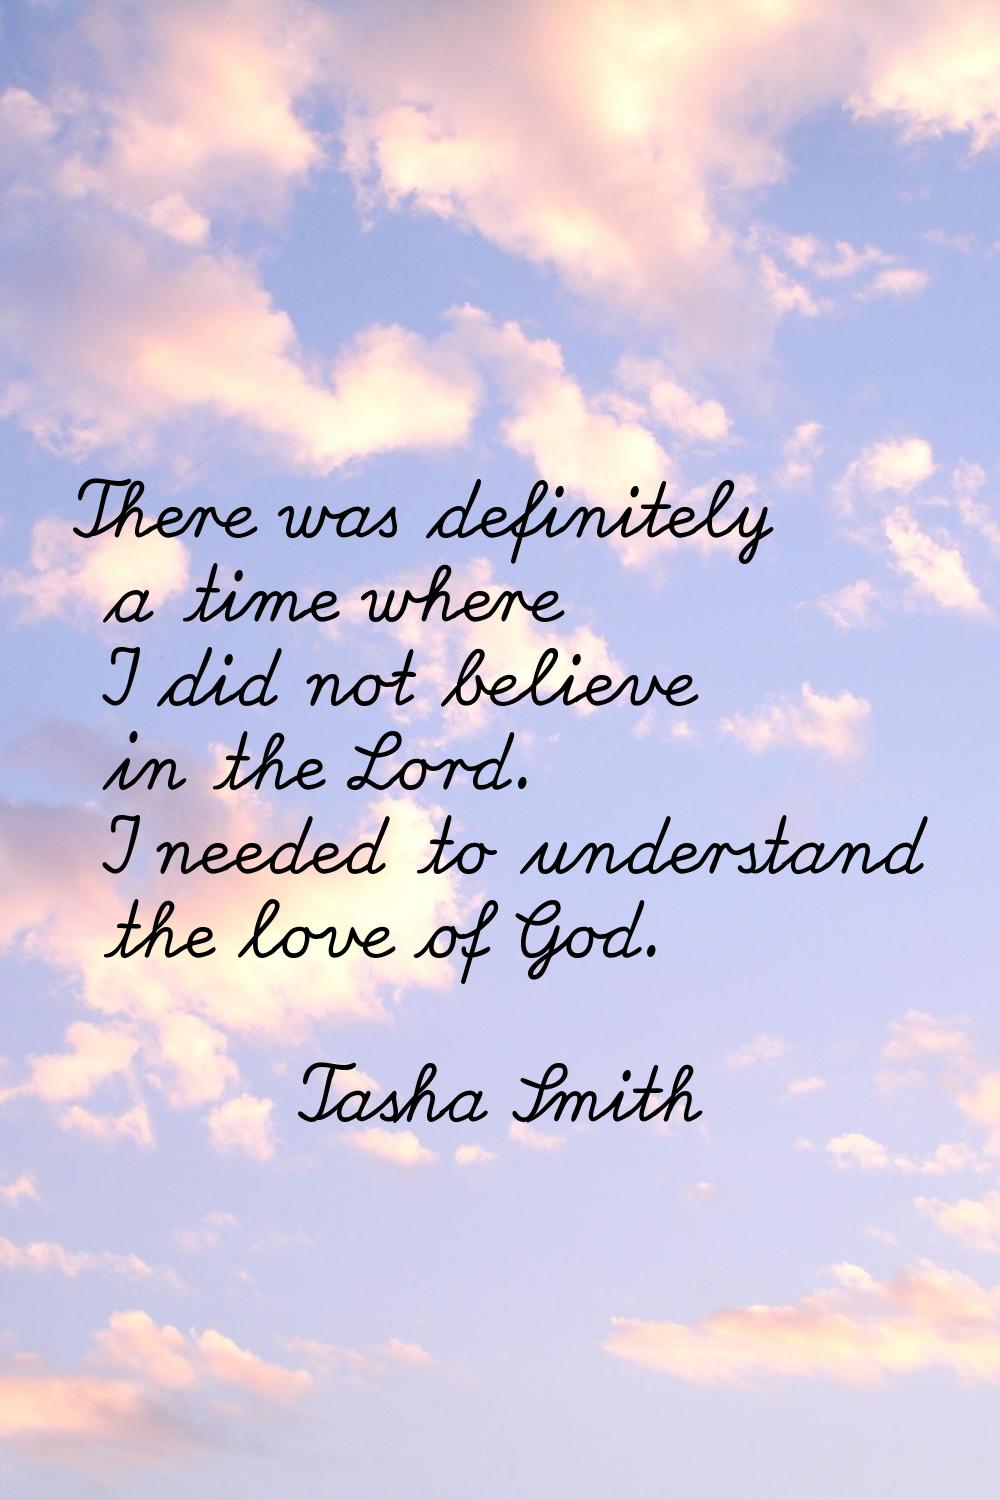 There was definitely a time where I did not believe in the Lord. I needed to understand the love of